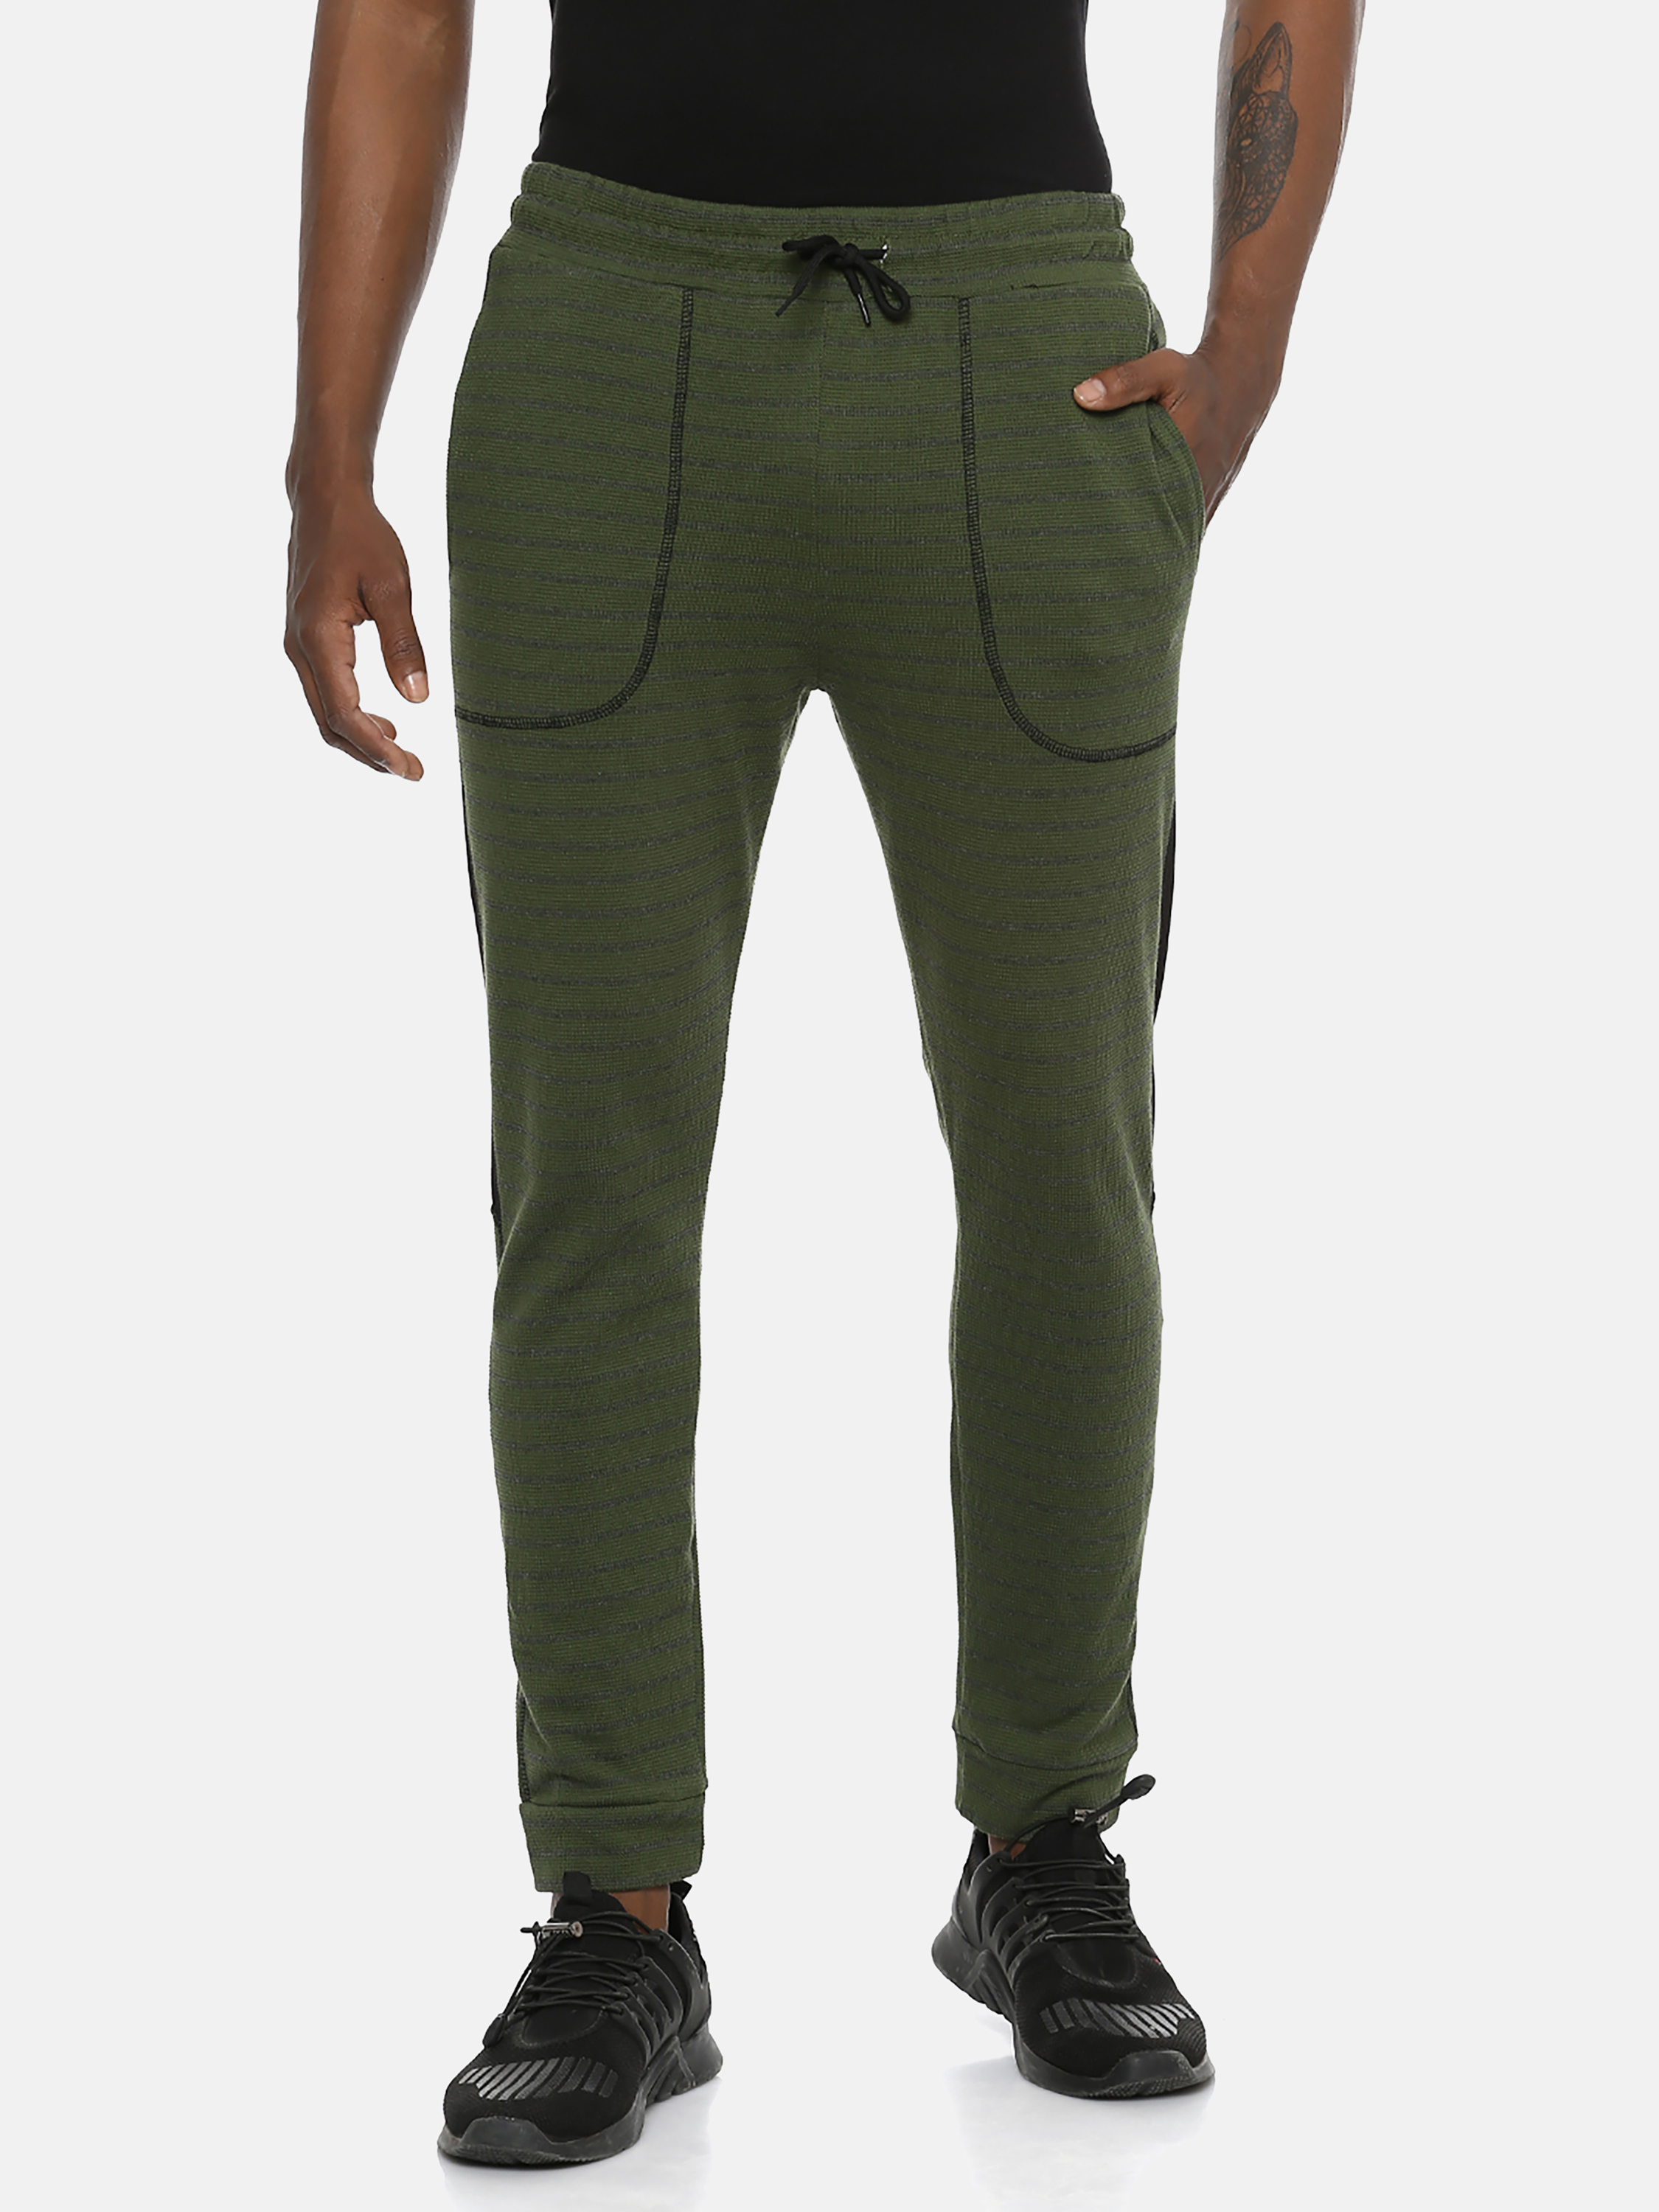 Men Striped Green Color Stylish Casual & Evevning Trackpant